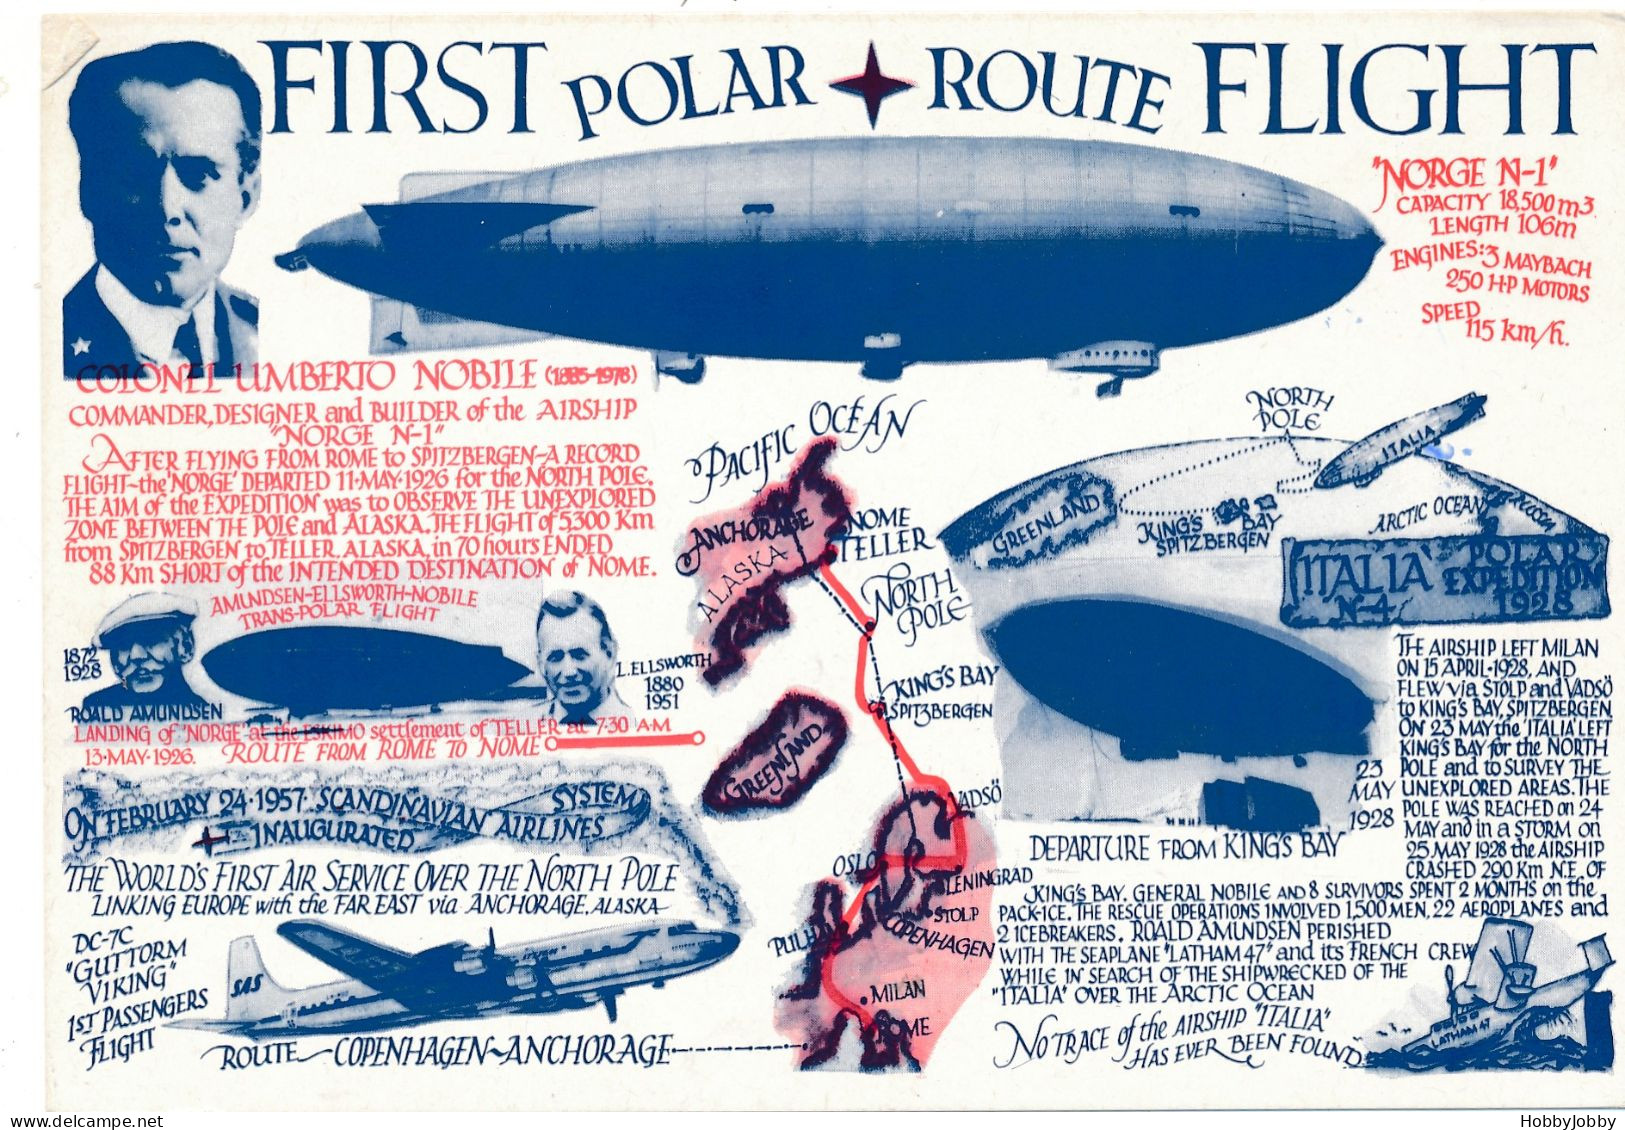 FIRST POLAR ROUTE FLIGHT: "ITALIA" Arrival At Kings Bay From Milan May 8-1928 + Graf Zeppelin/Hindenburg/Africa Zeppel++ - Norway